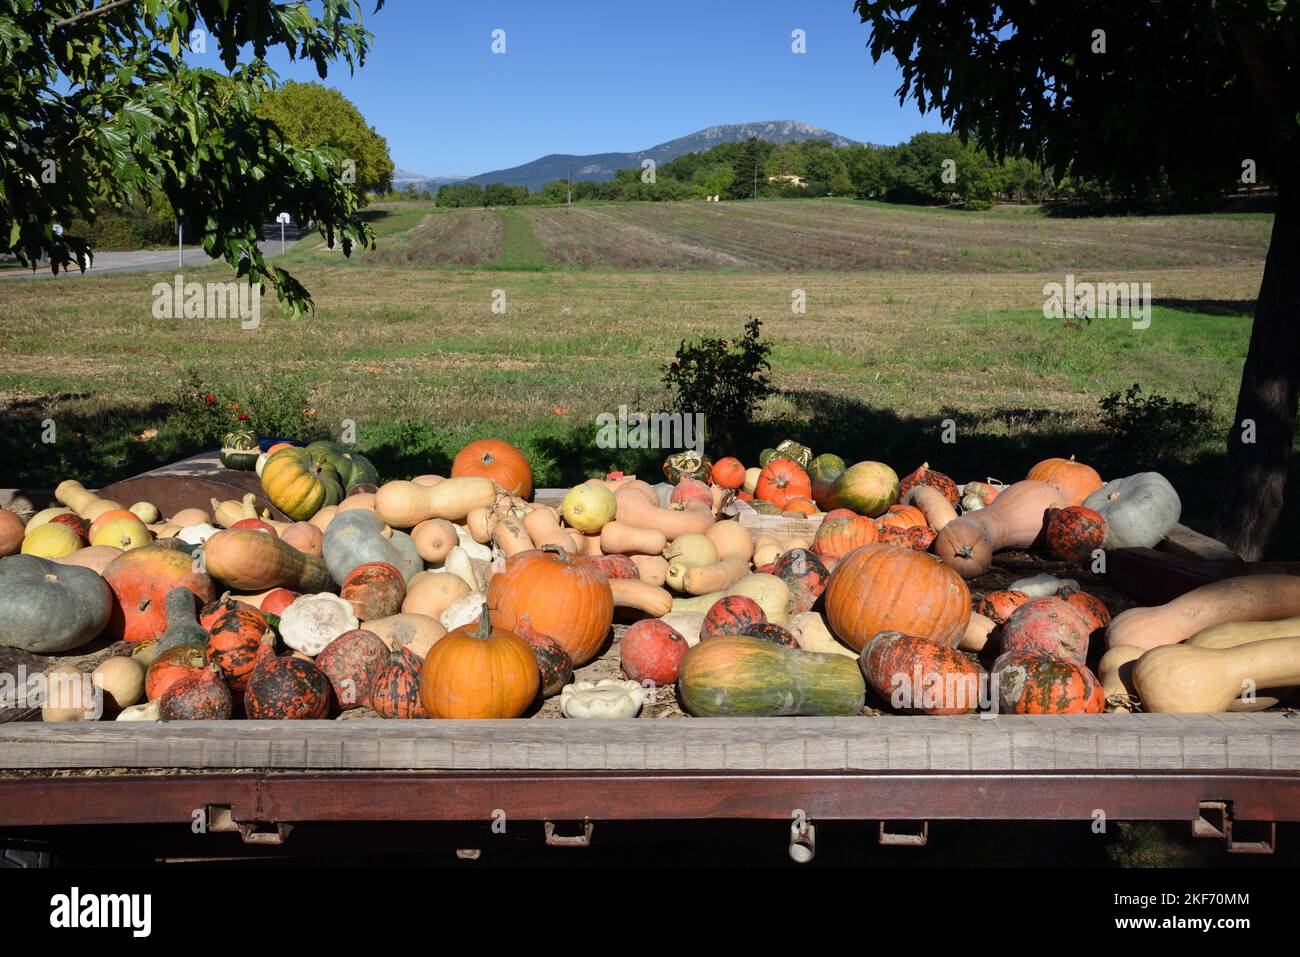 Display of Pumpkins, Squash and Gourds including Butternut Squash and Musquée de Provence for Sale on Roadside Provence France Stock Photo